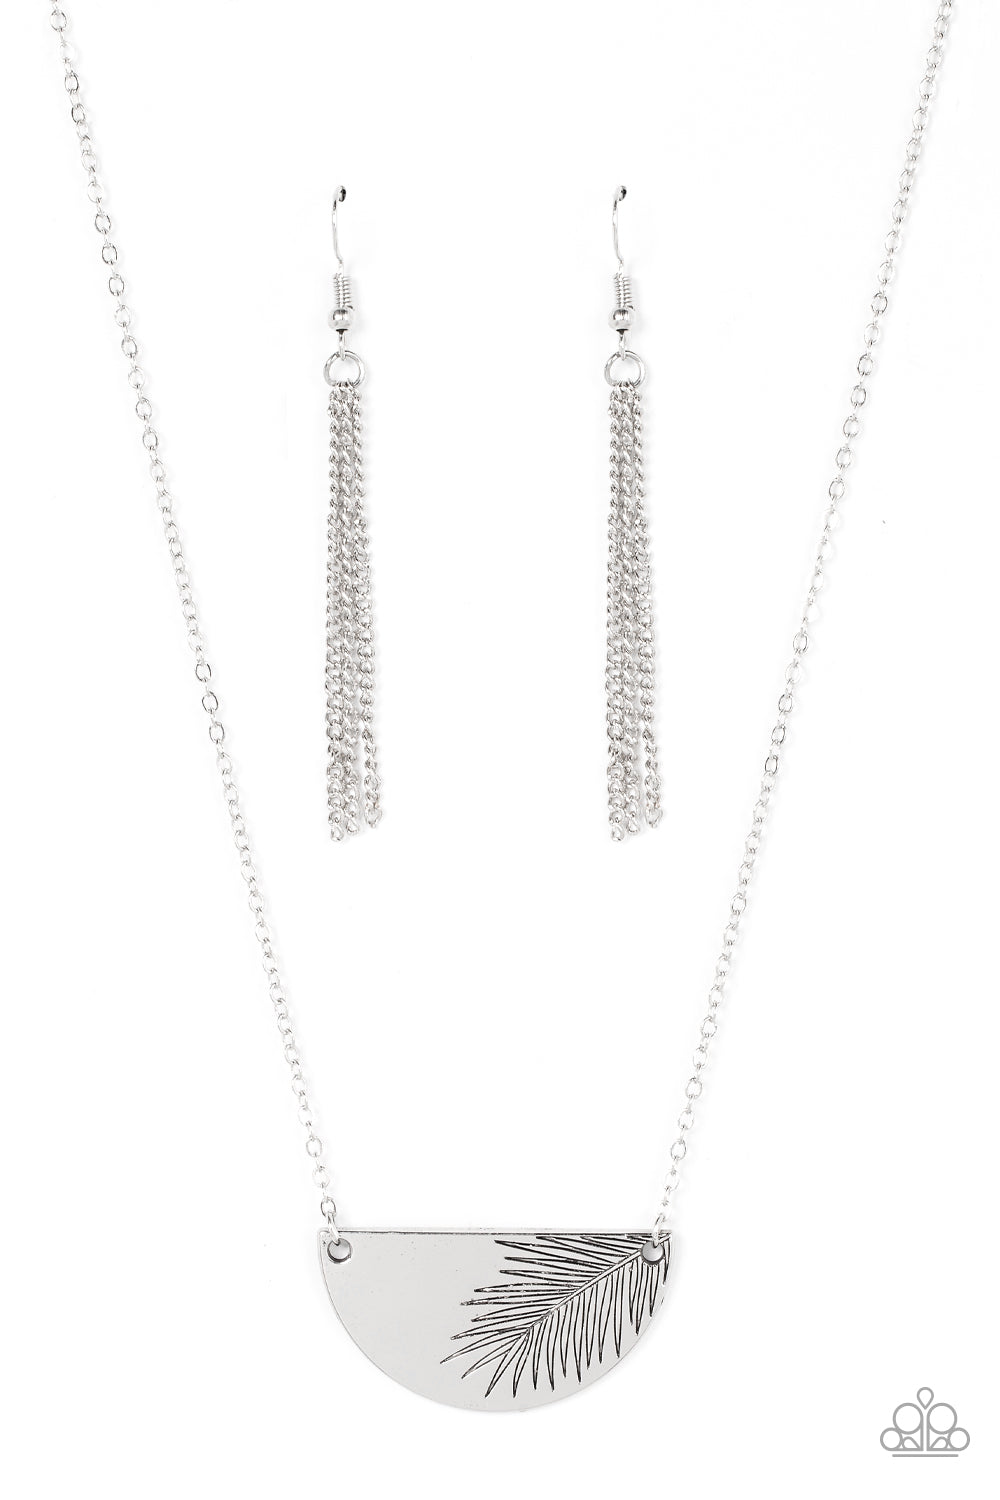 Paparazzi ♥ Cool, PALM, and Collected - Silver ♥ Necklace